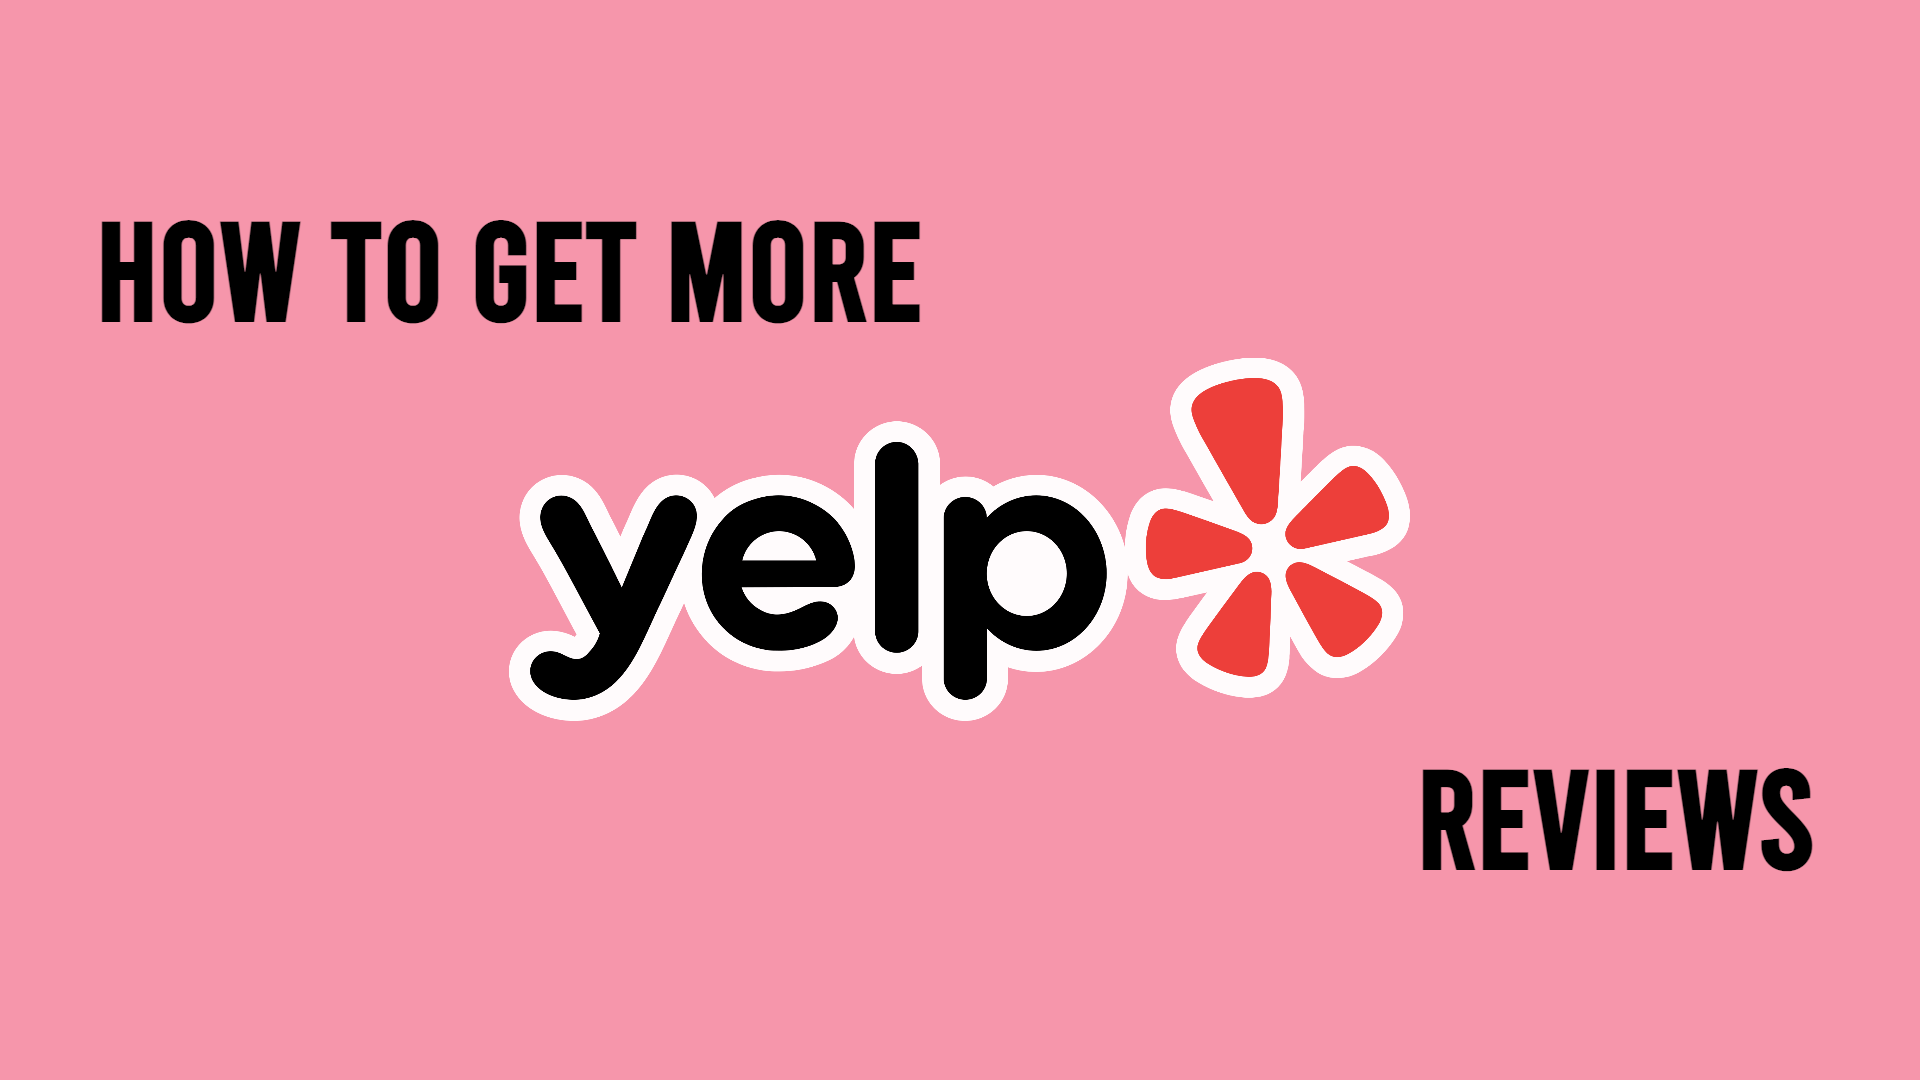 How to Get More yelp Reviews